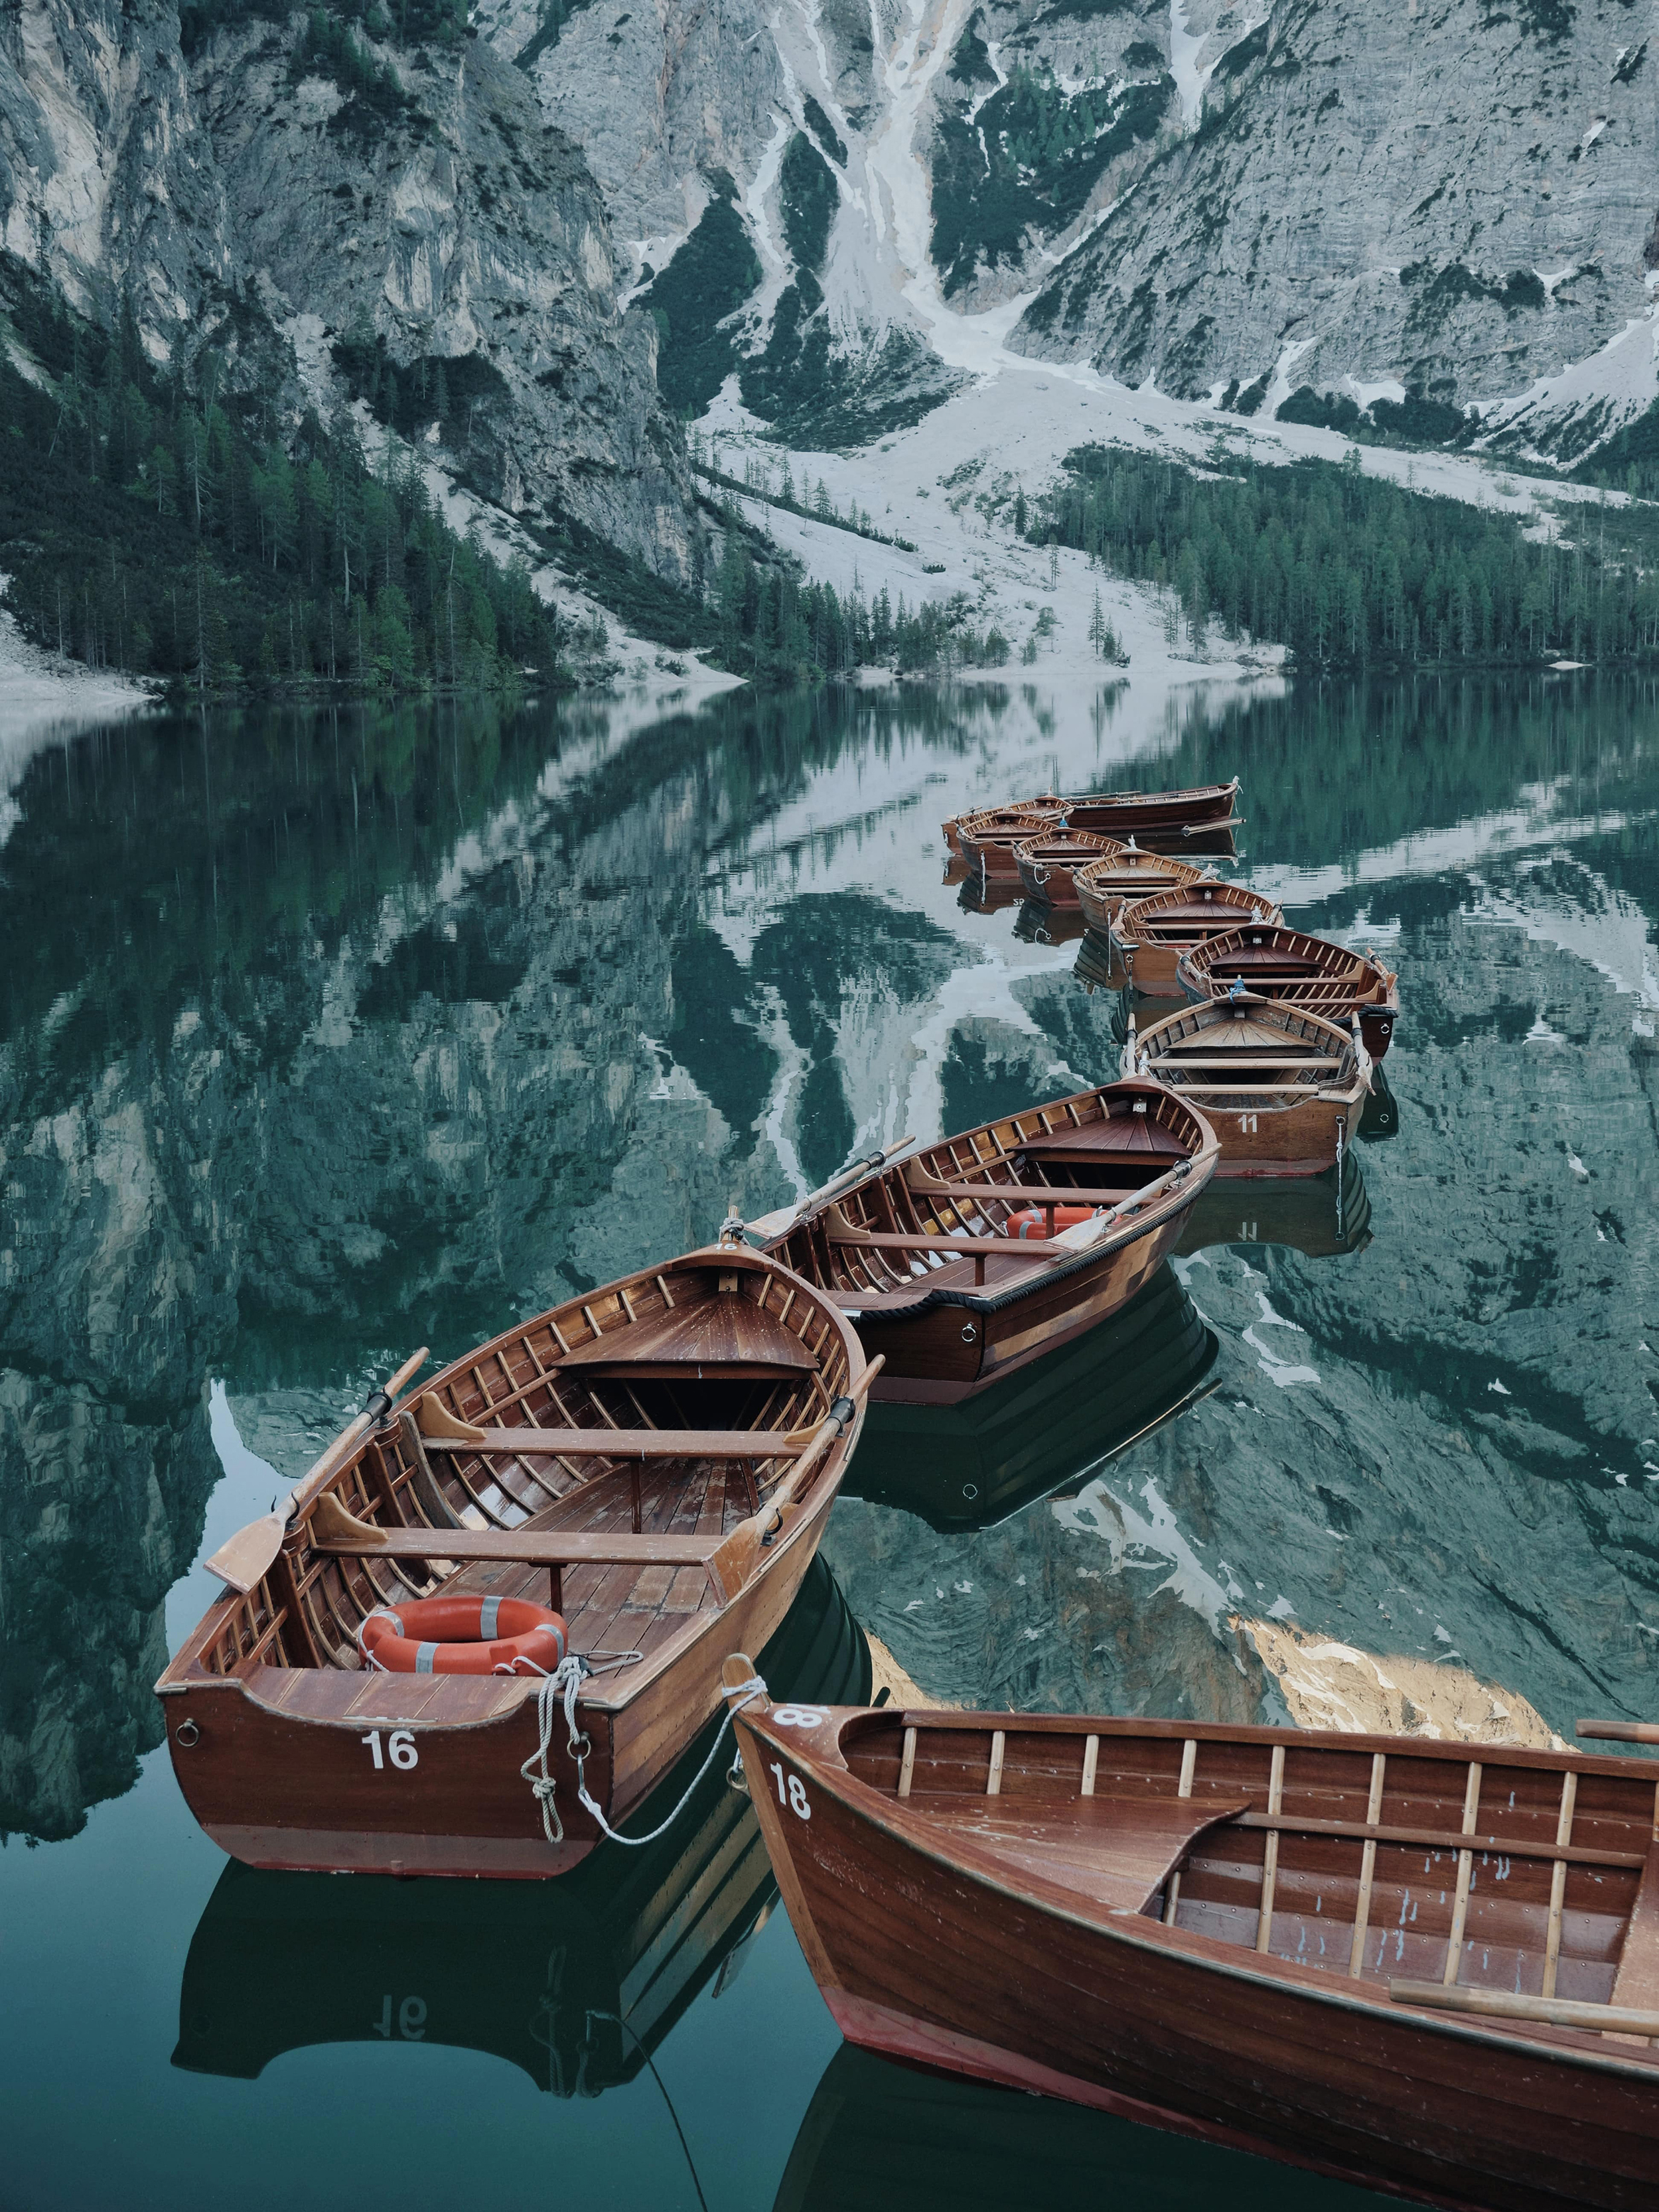 Mountain river in Italy, boats floating